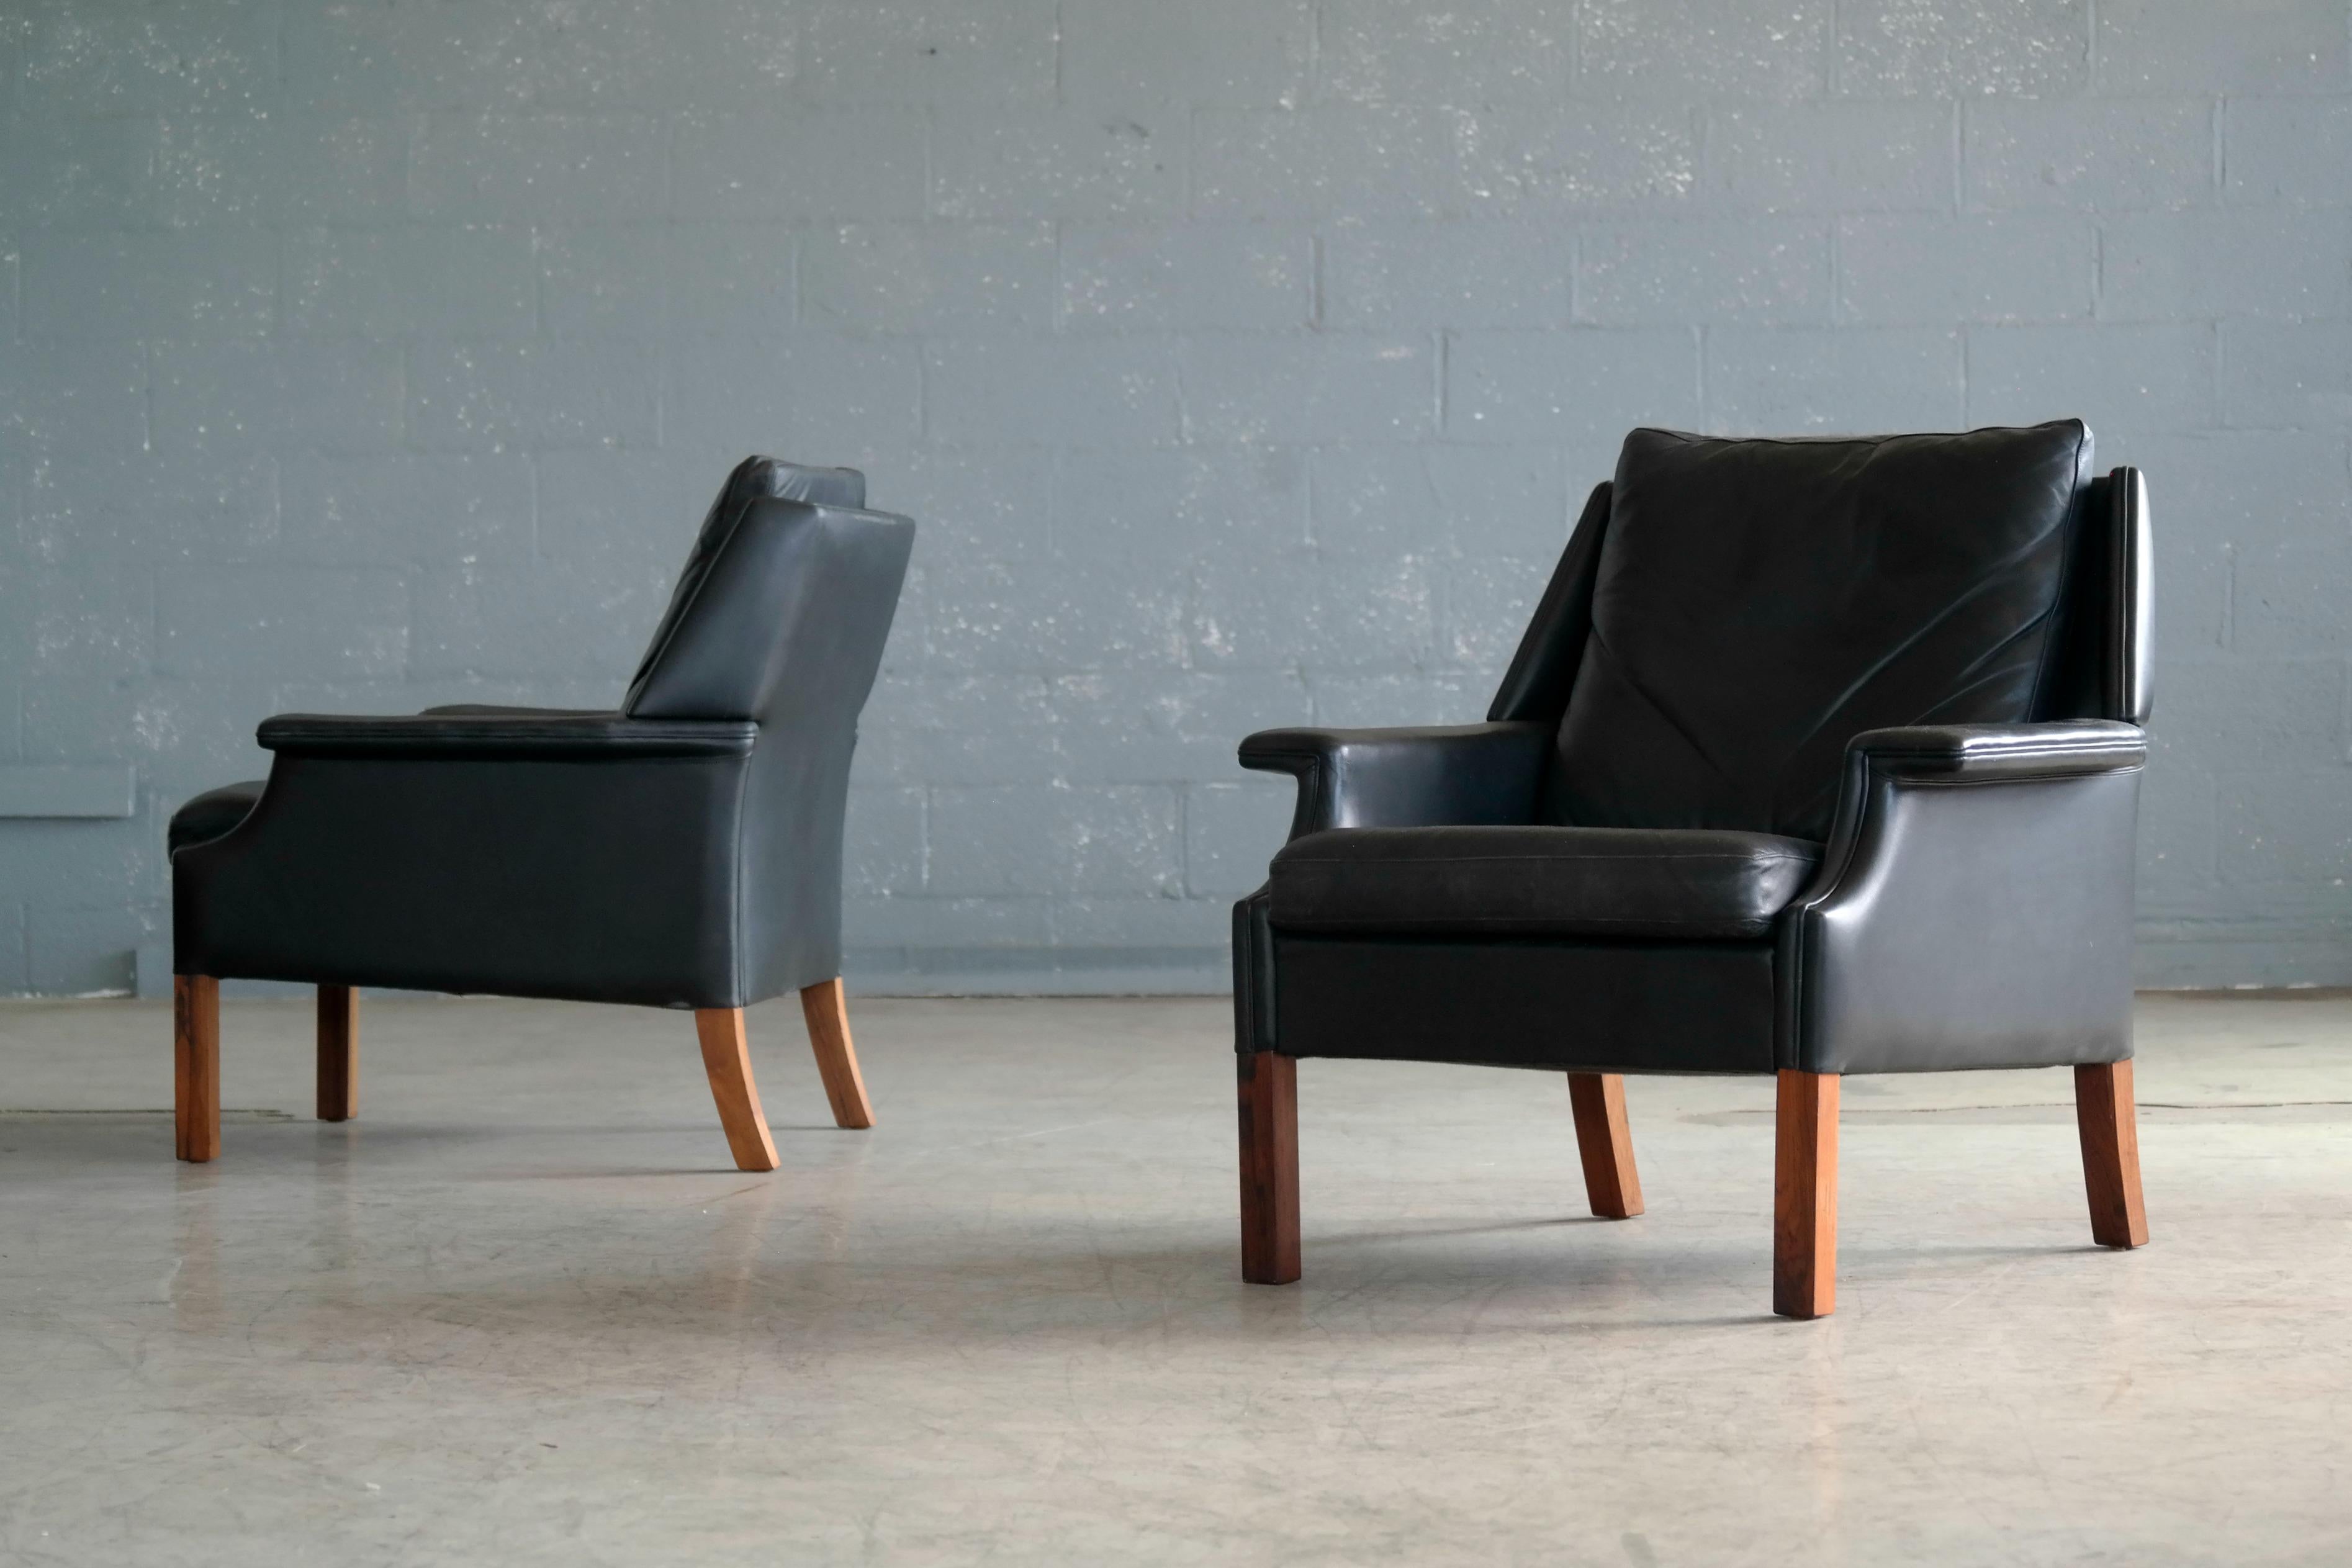 Superb pair of Danish Georg Thams designed 1960s lounge chair in black leather with rosewood legs. Very high end build quality and great design details. Rich in details with nice natural wear and patina to the leather which remains supple and in